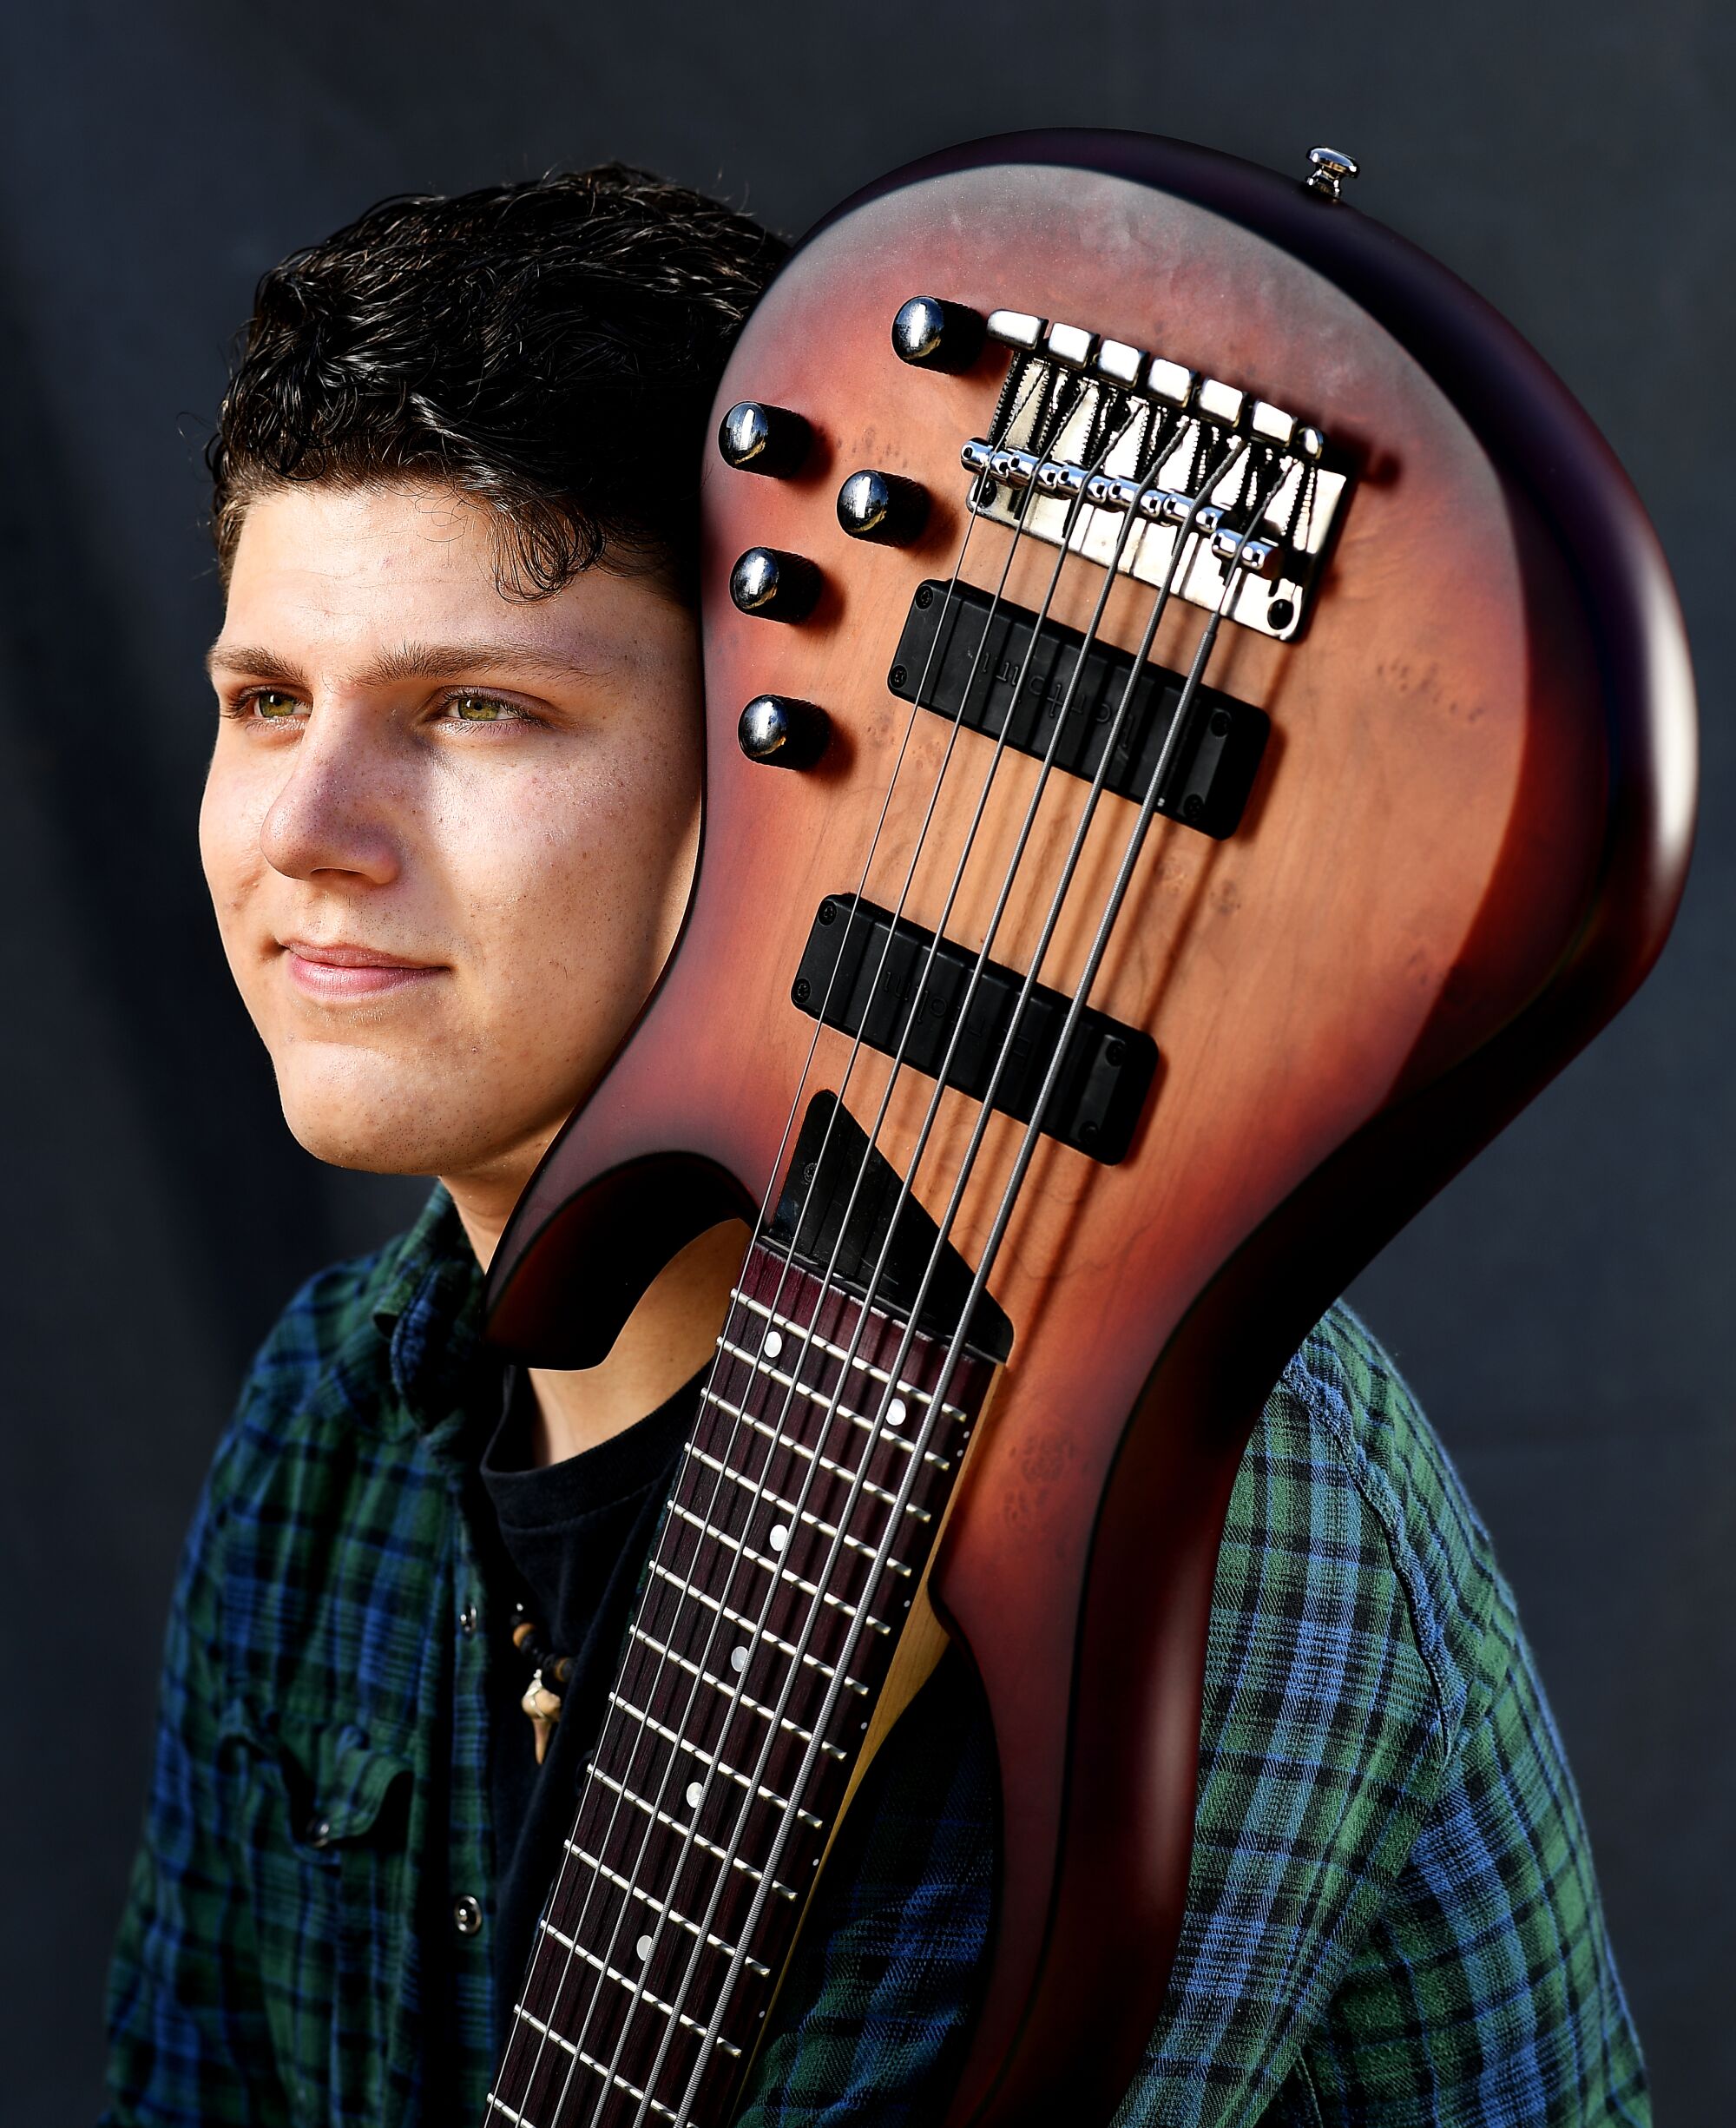 James Bergren, a bass player who plans to attend Berklee College of Music in Boston this fall